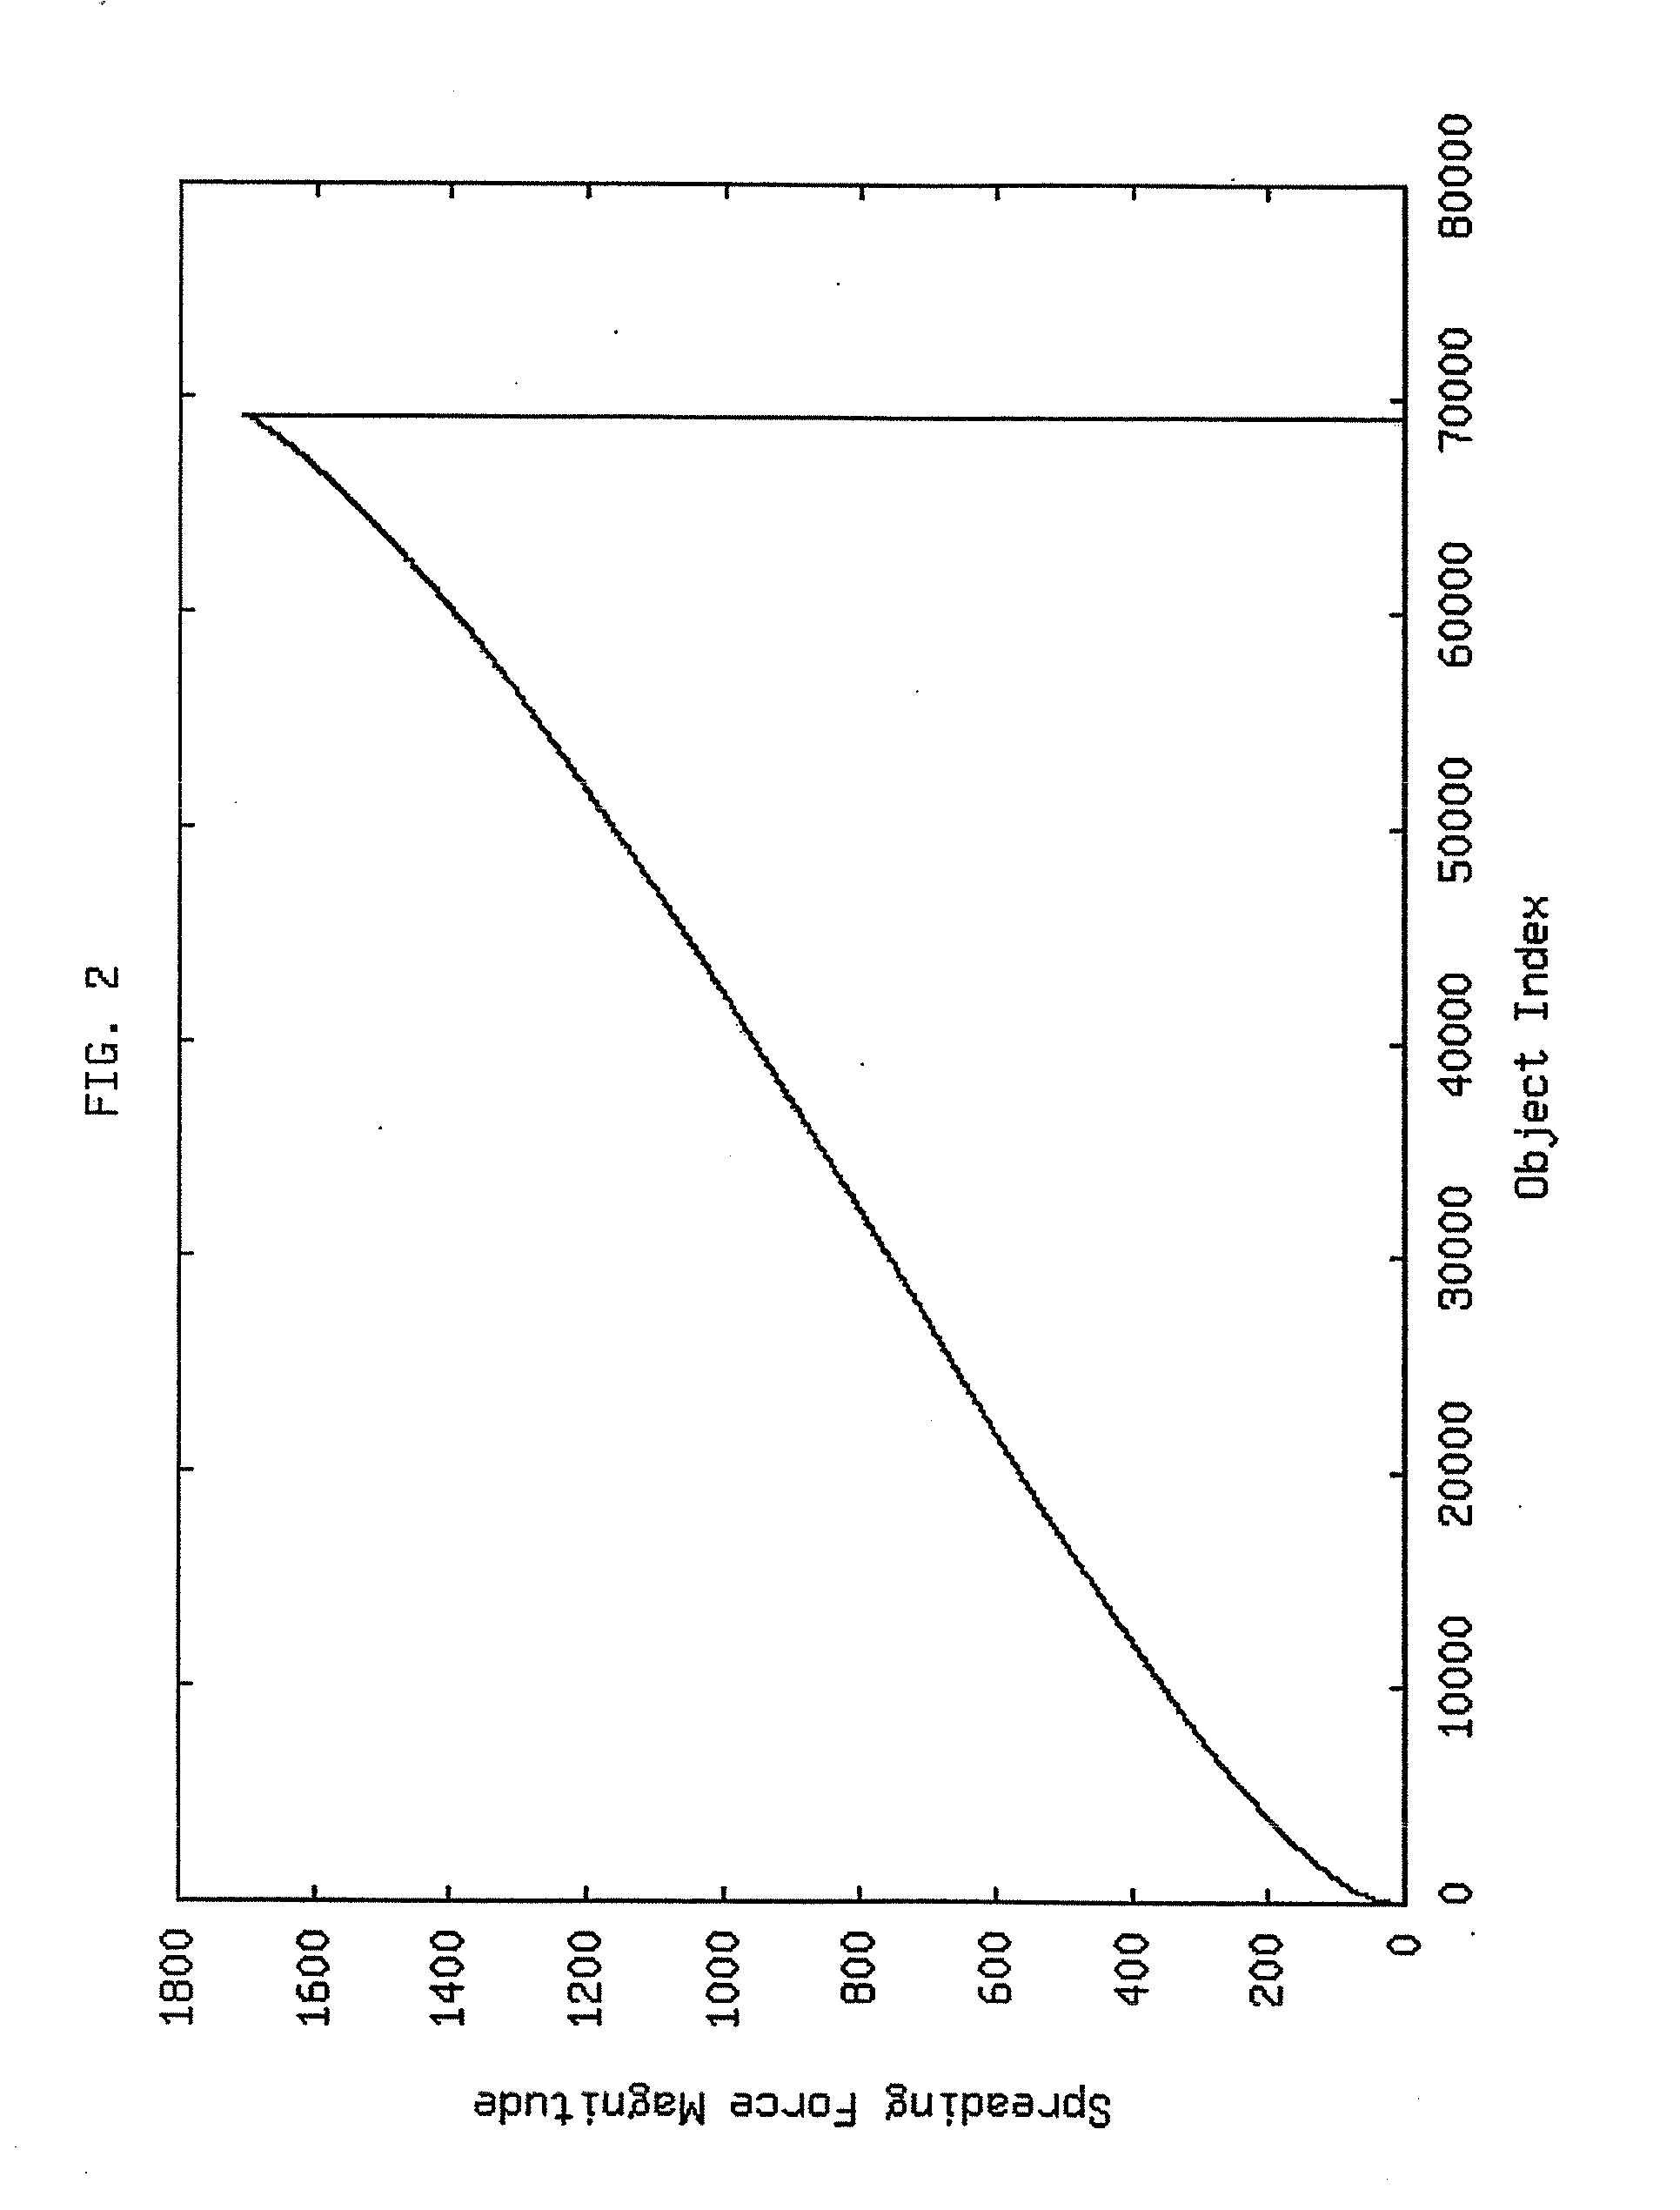 Method to reduce the wirelength of analytical placement techniques by modulation of spreading forces vectors